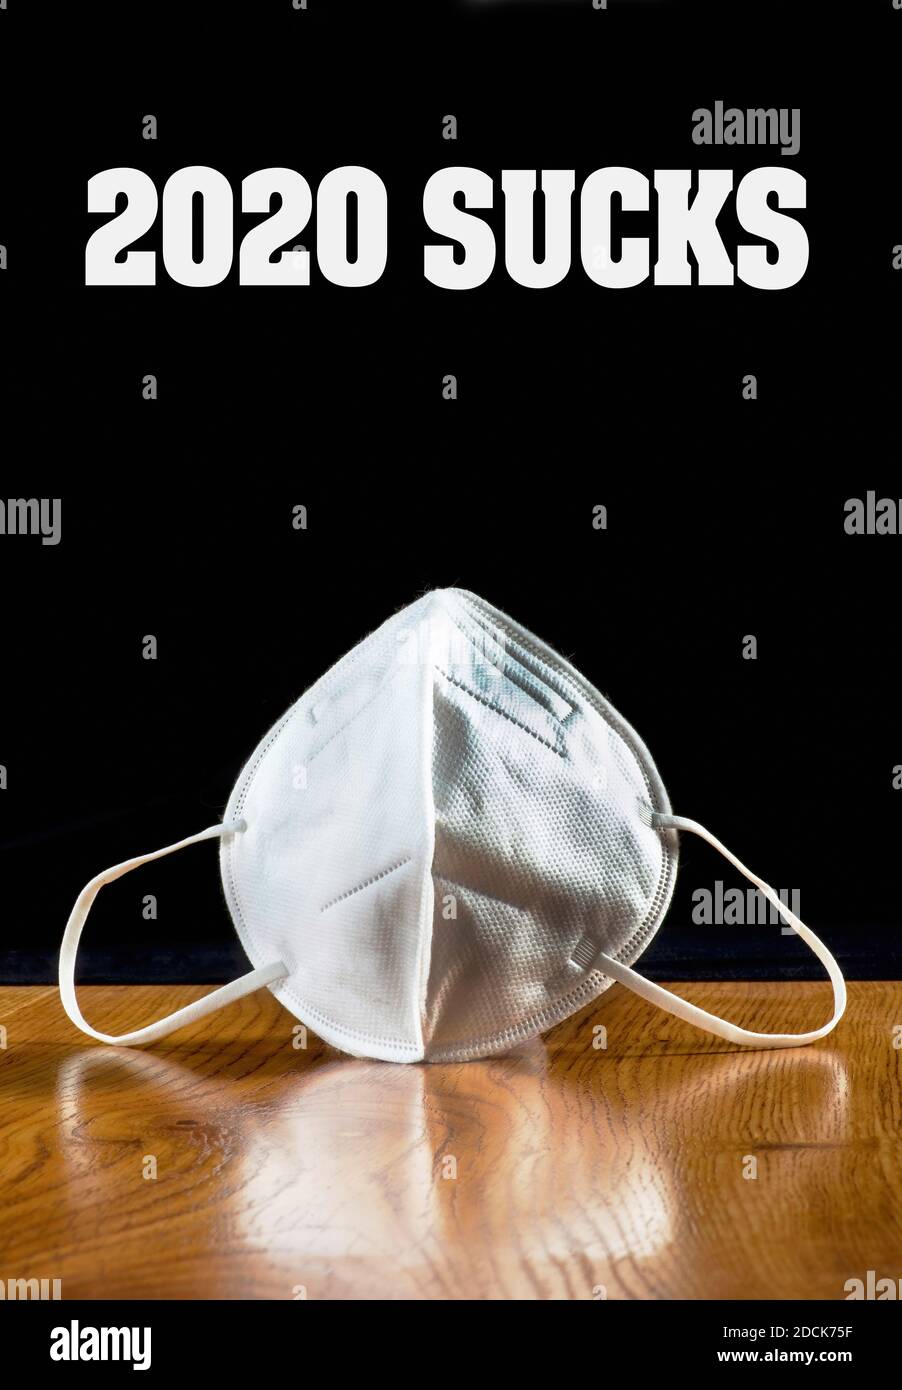 2020 sucks with the pandemic. Stock Photo